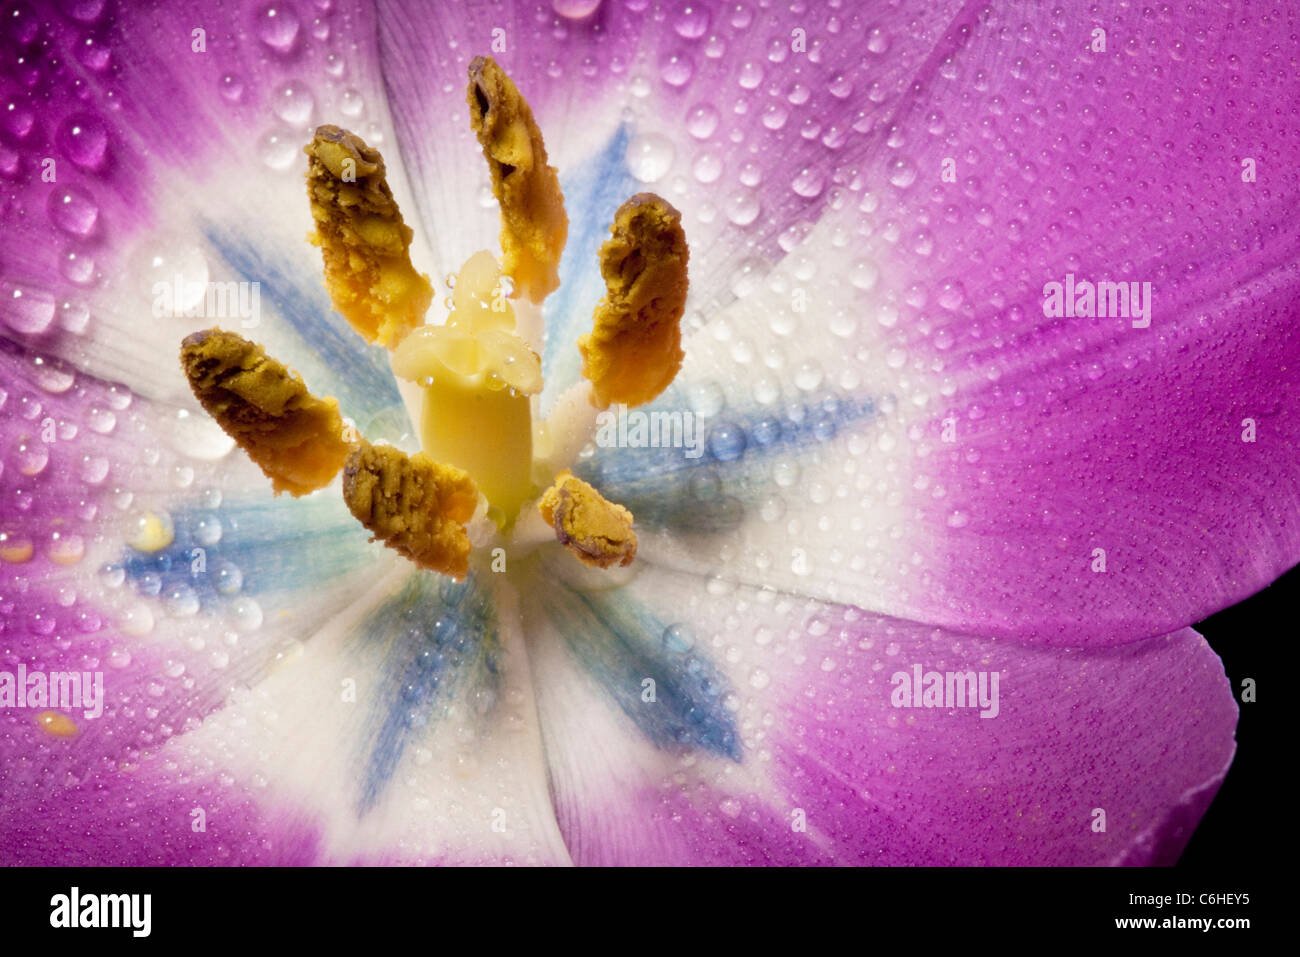 Purple flower showing petals stigma and anthers Stock Photo